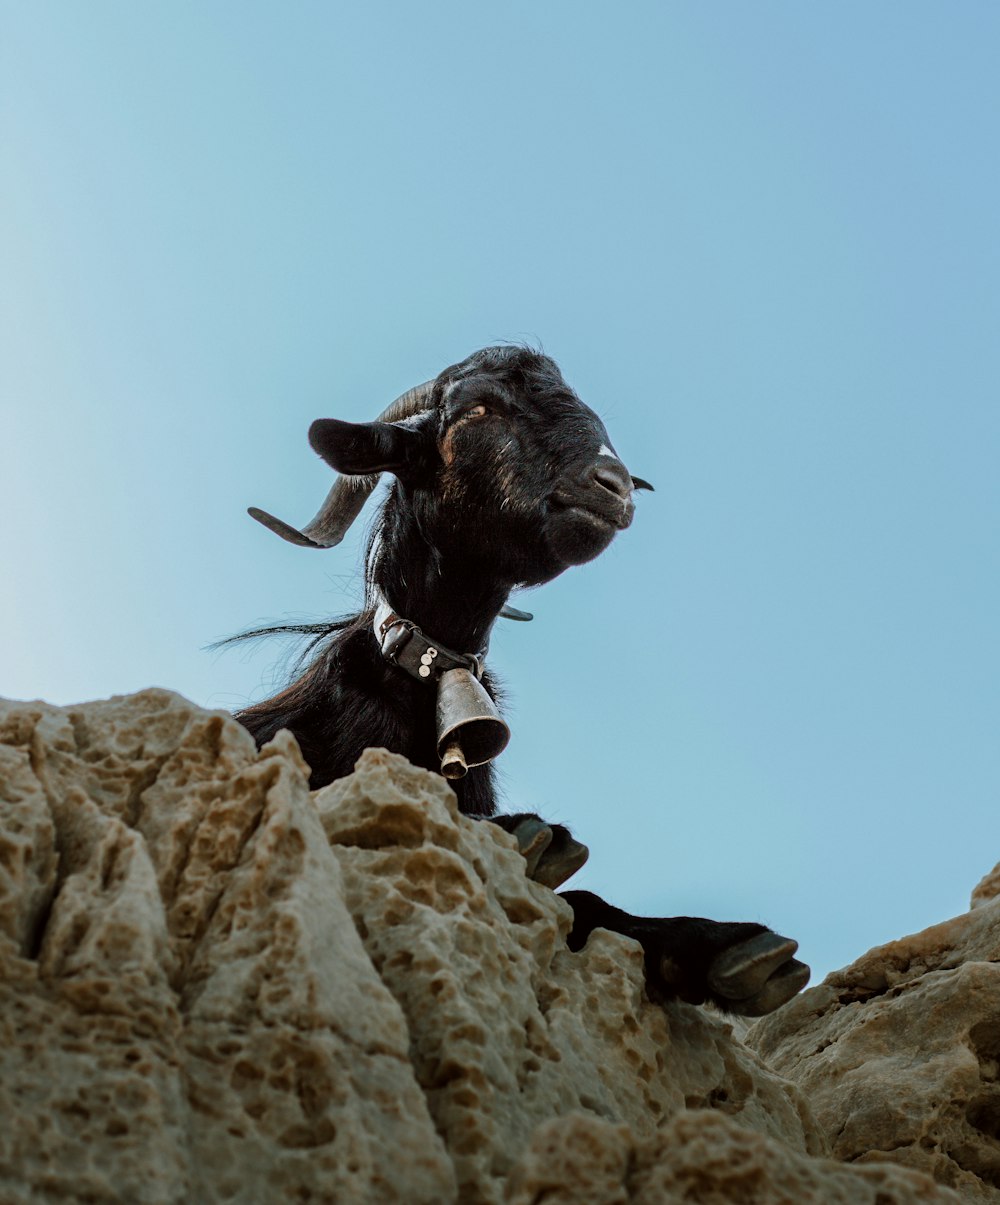 a goat with long horns standing on a rock